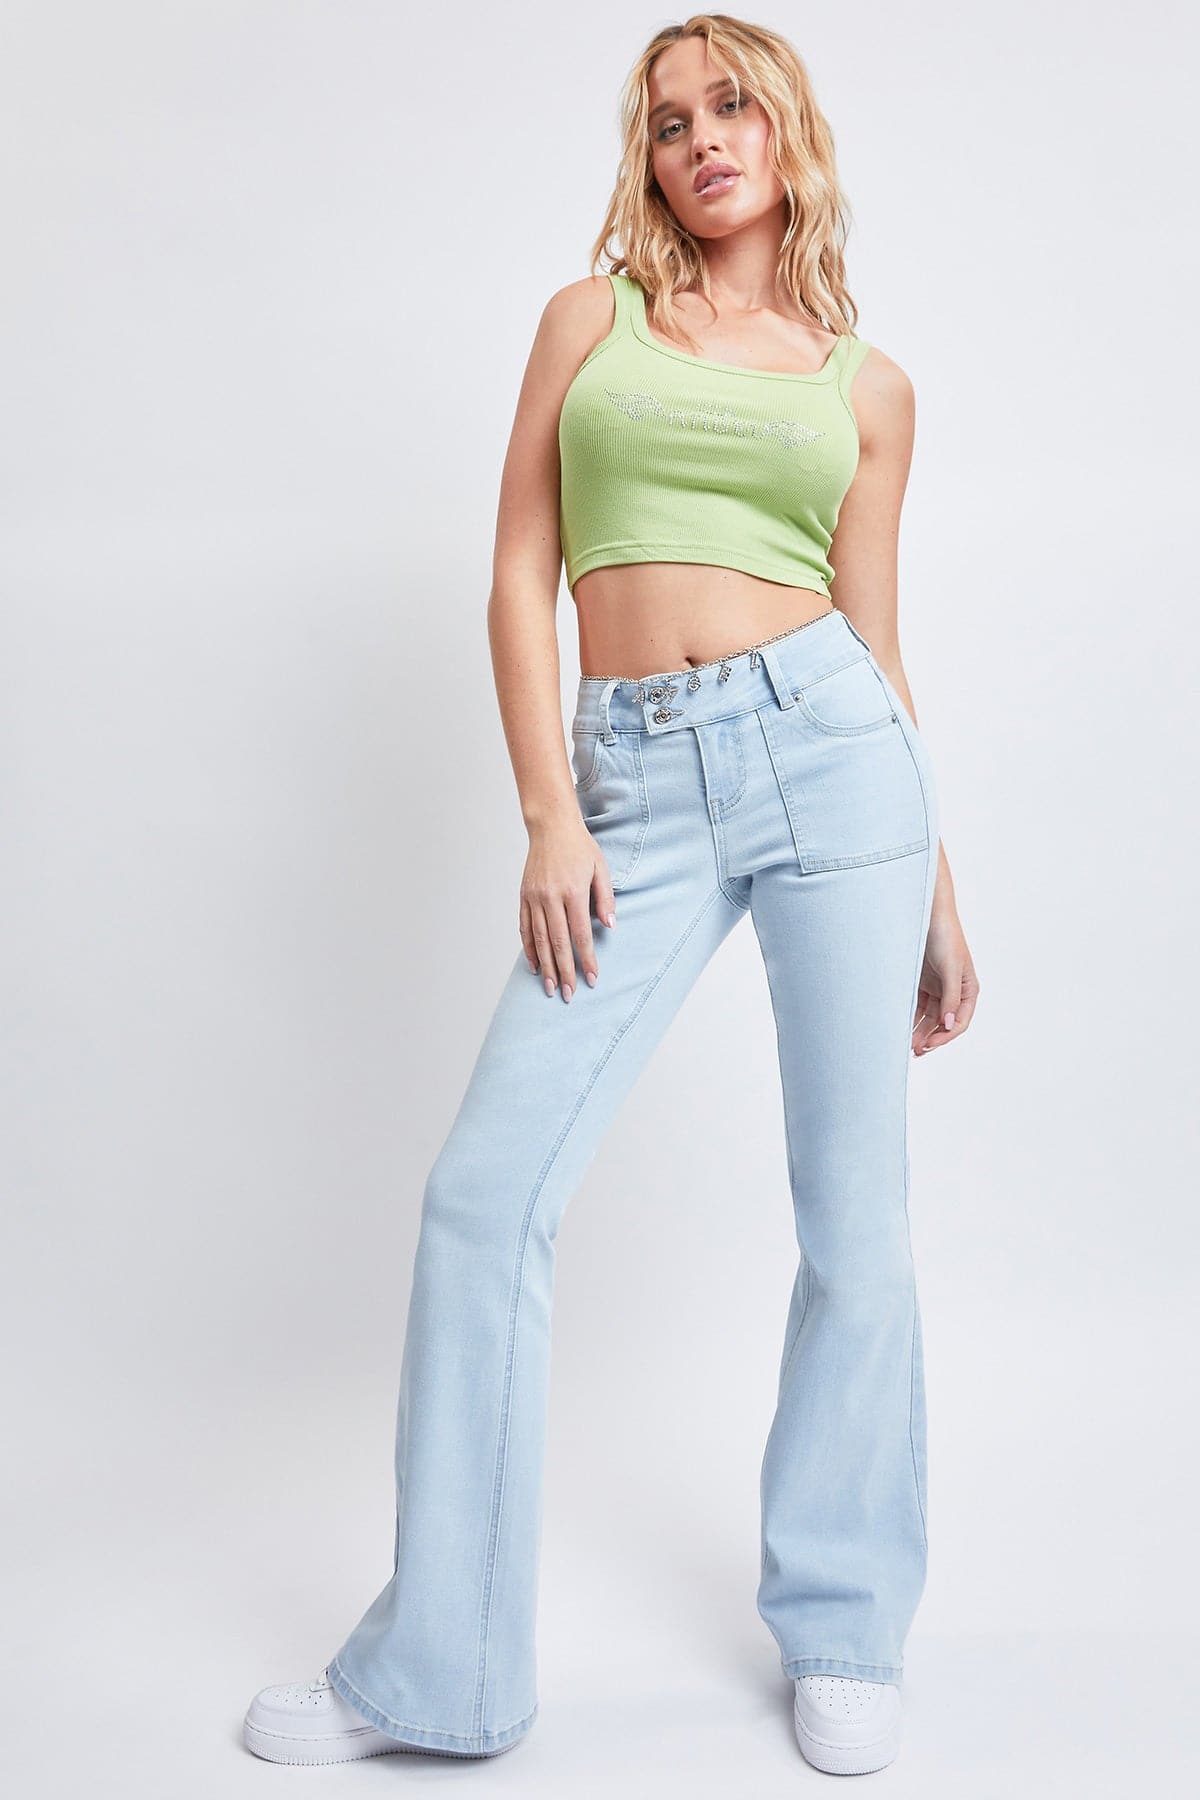 Women's Dream with Fold-Over Waist Low Rise Jeans from YMI – YMI JEANS